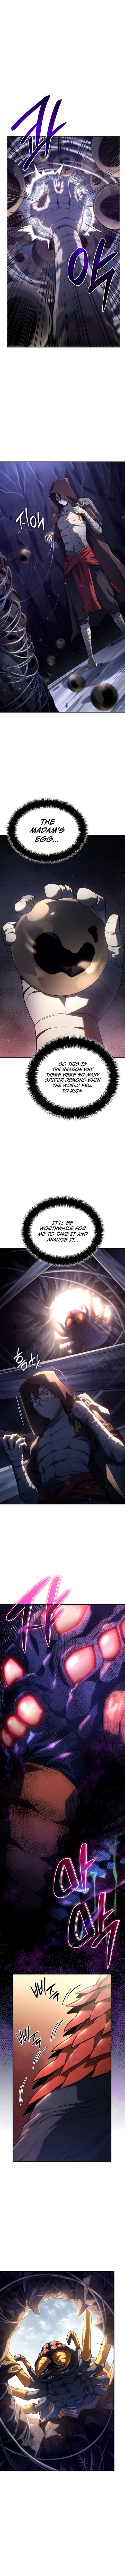 Revenge of the Iron-Blooded Sword Hound Chapter 57 page 6